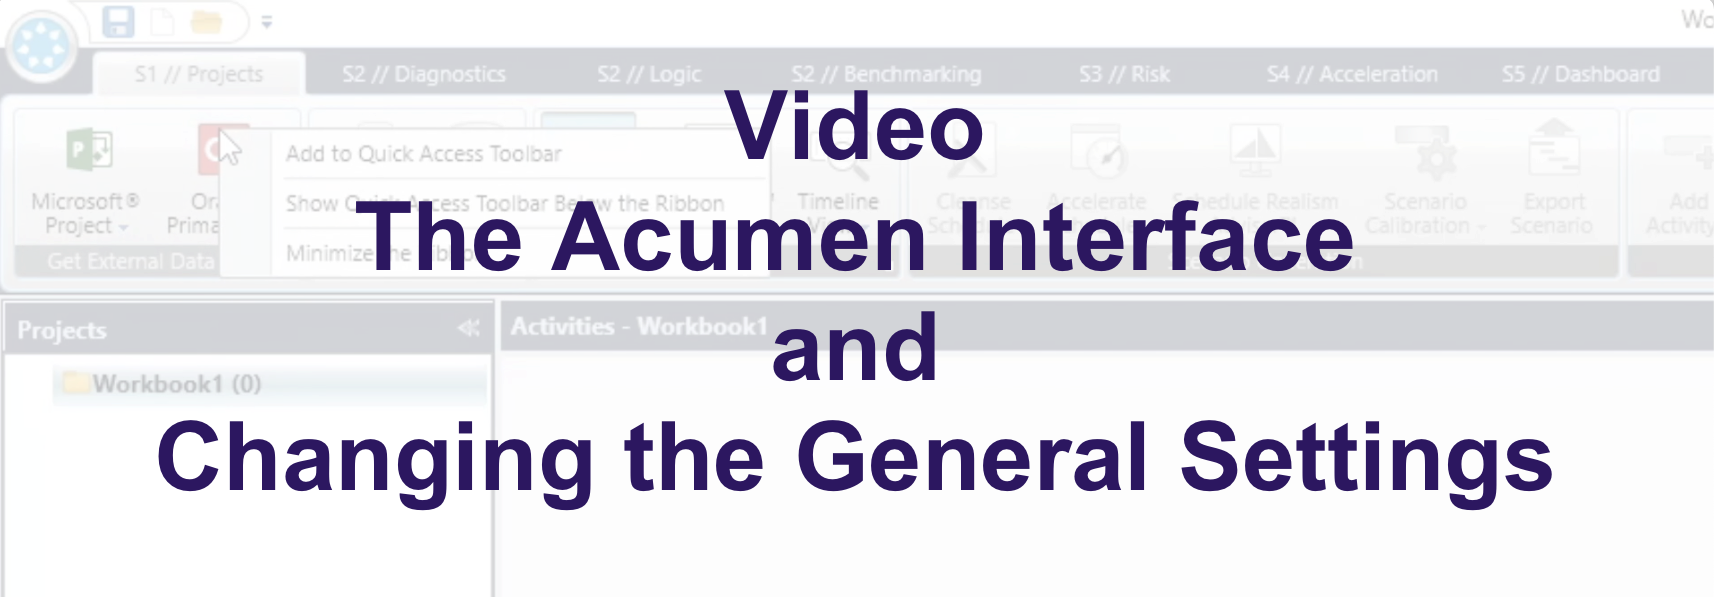 Video - The Acumen Interface and Changing the General Settings